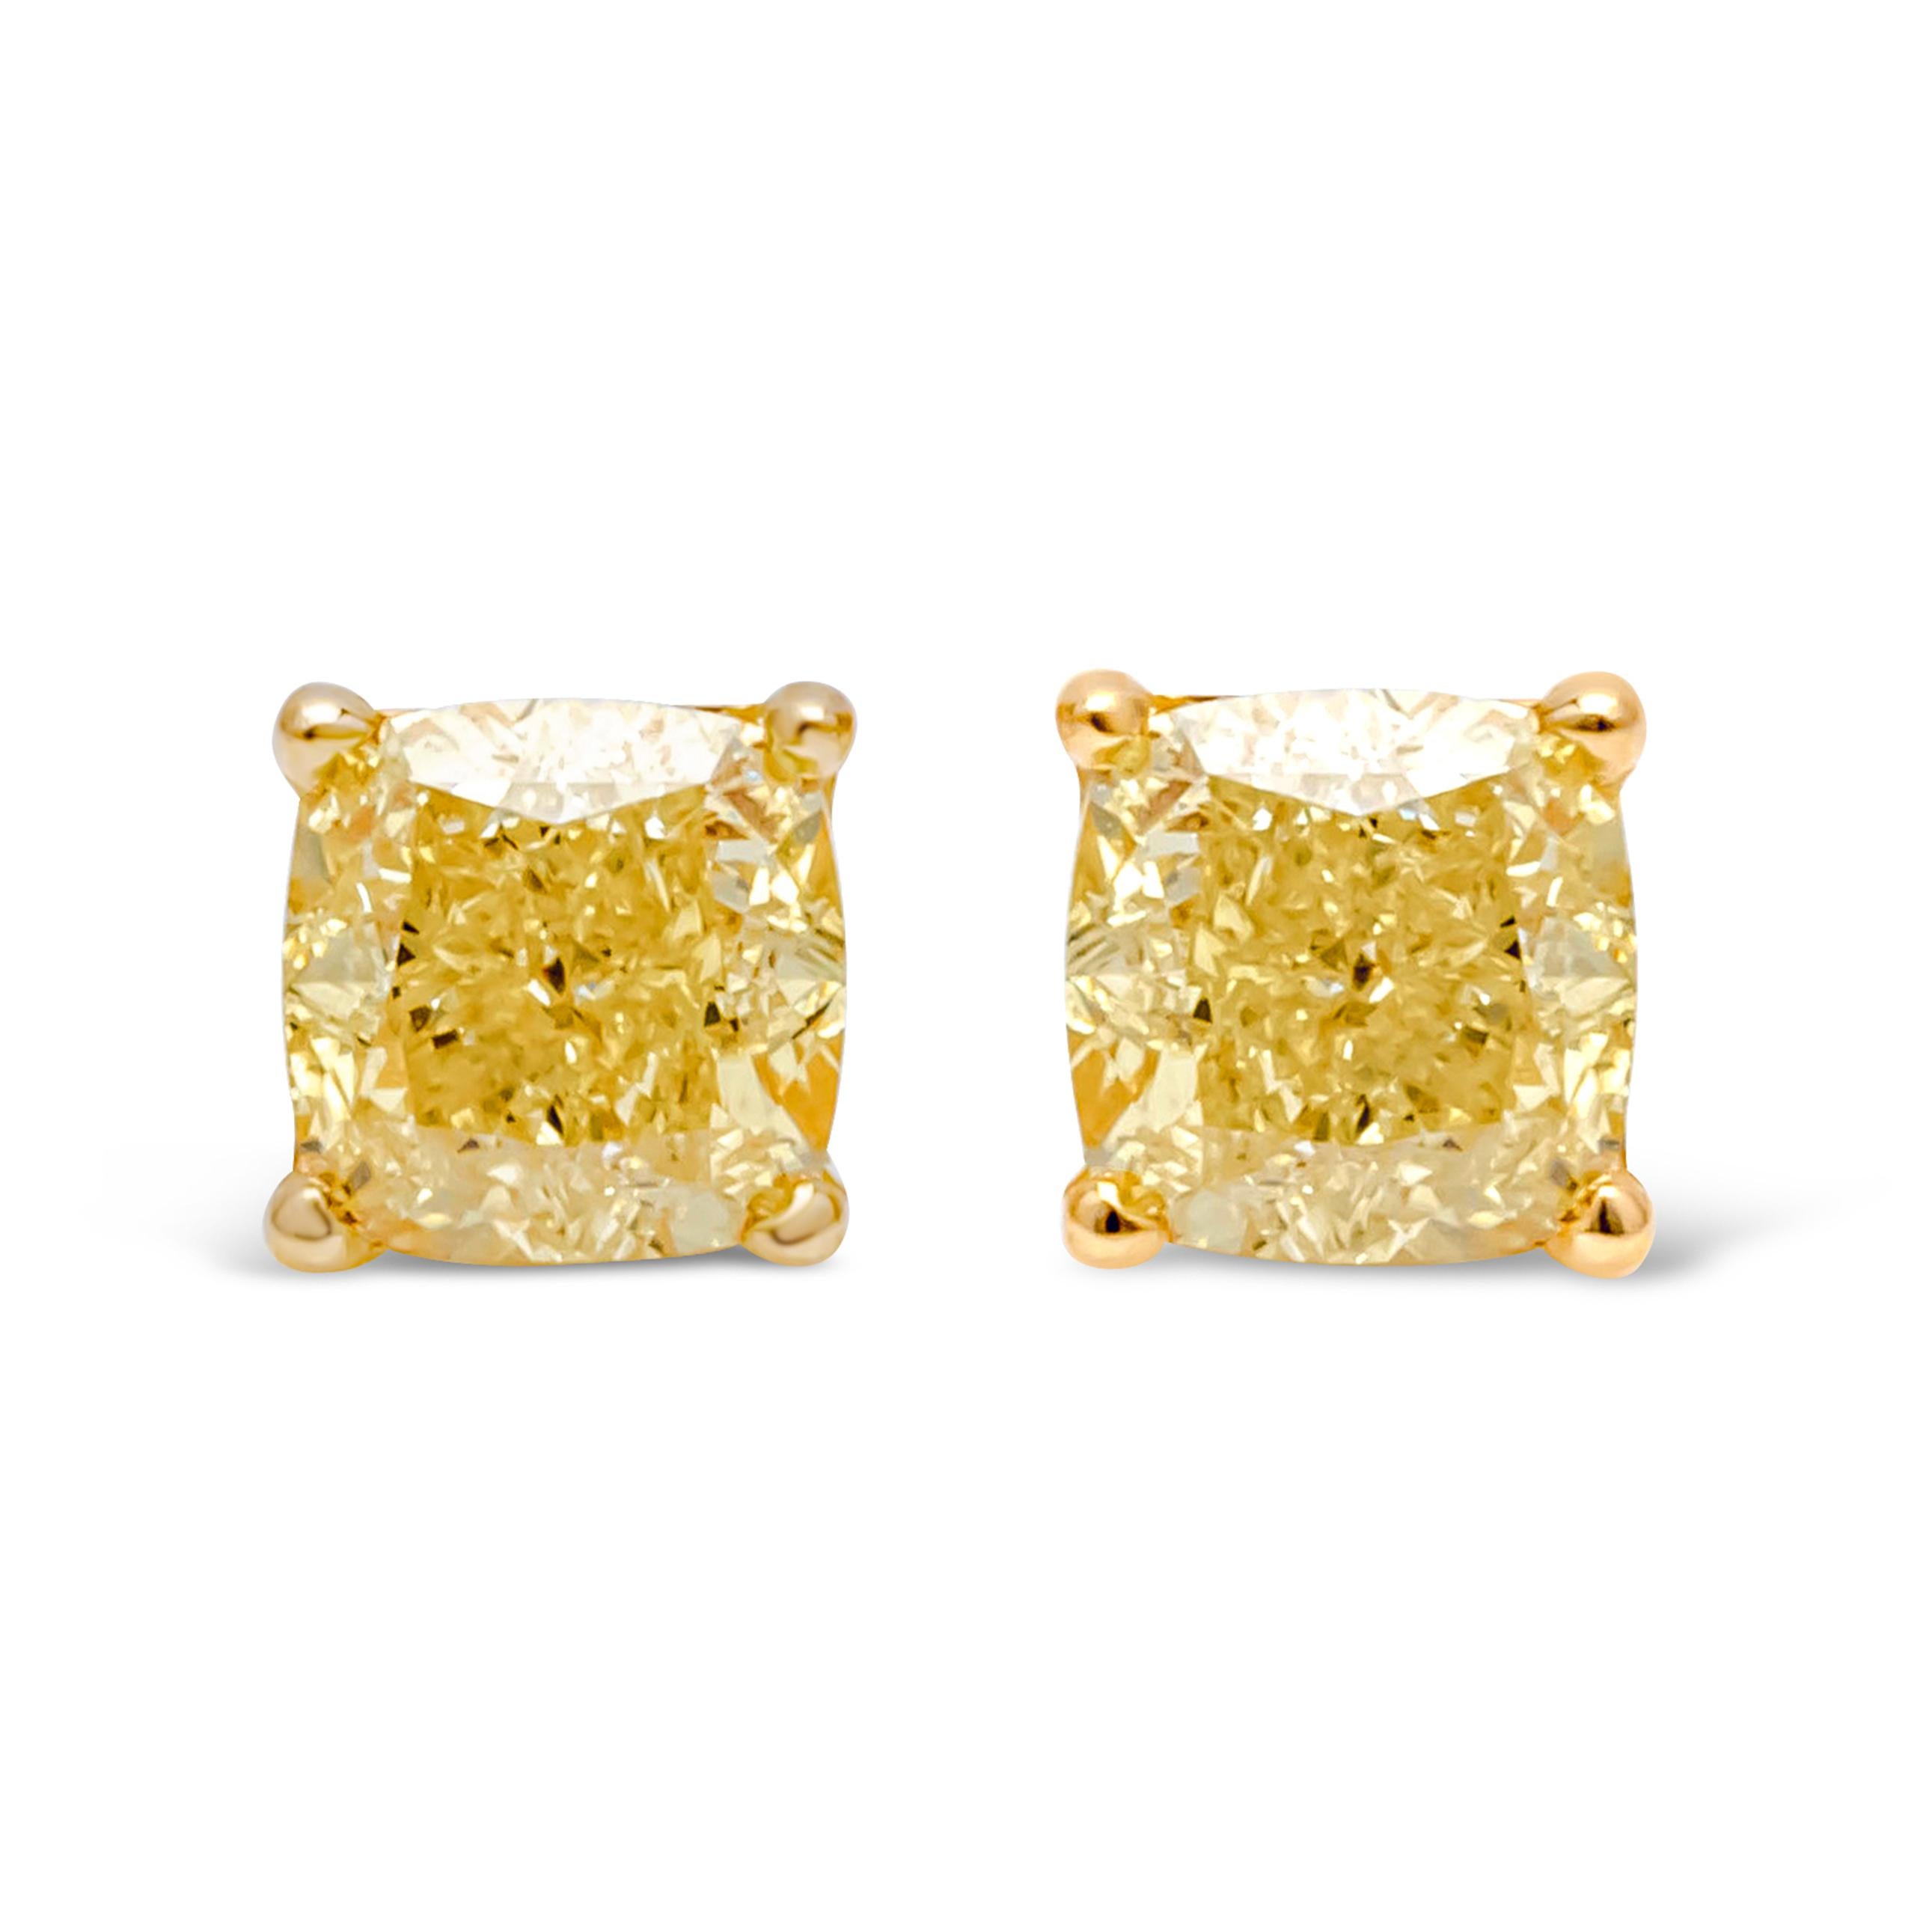 A simple and vibrant pair of stud earrings showcasing a color-rich cushion cut fancy Intense yellow diamonds weighing 0.85 carats total, VS+ in Clarity. Set in a timeless four prong push back setting and Finely made in 18k yellow gold.

Style